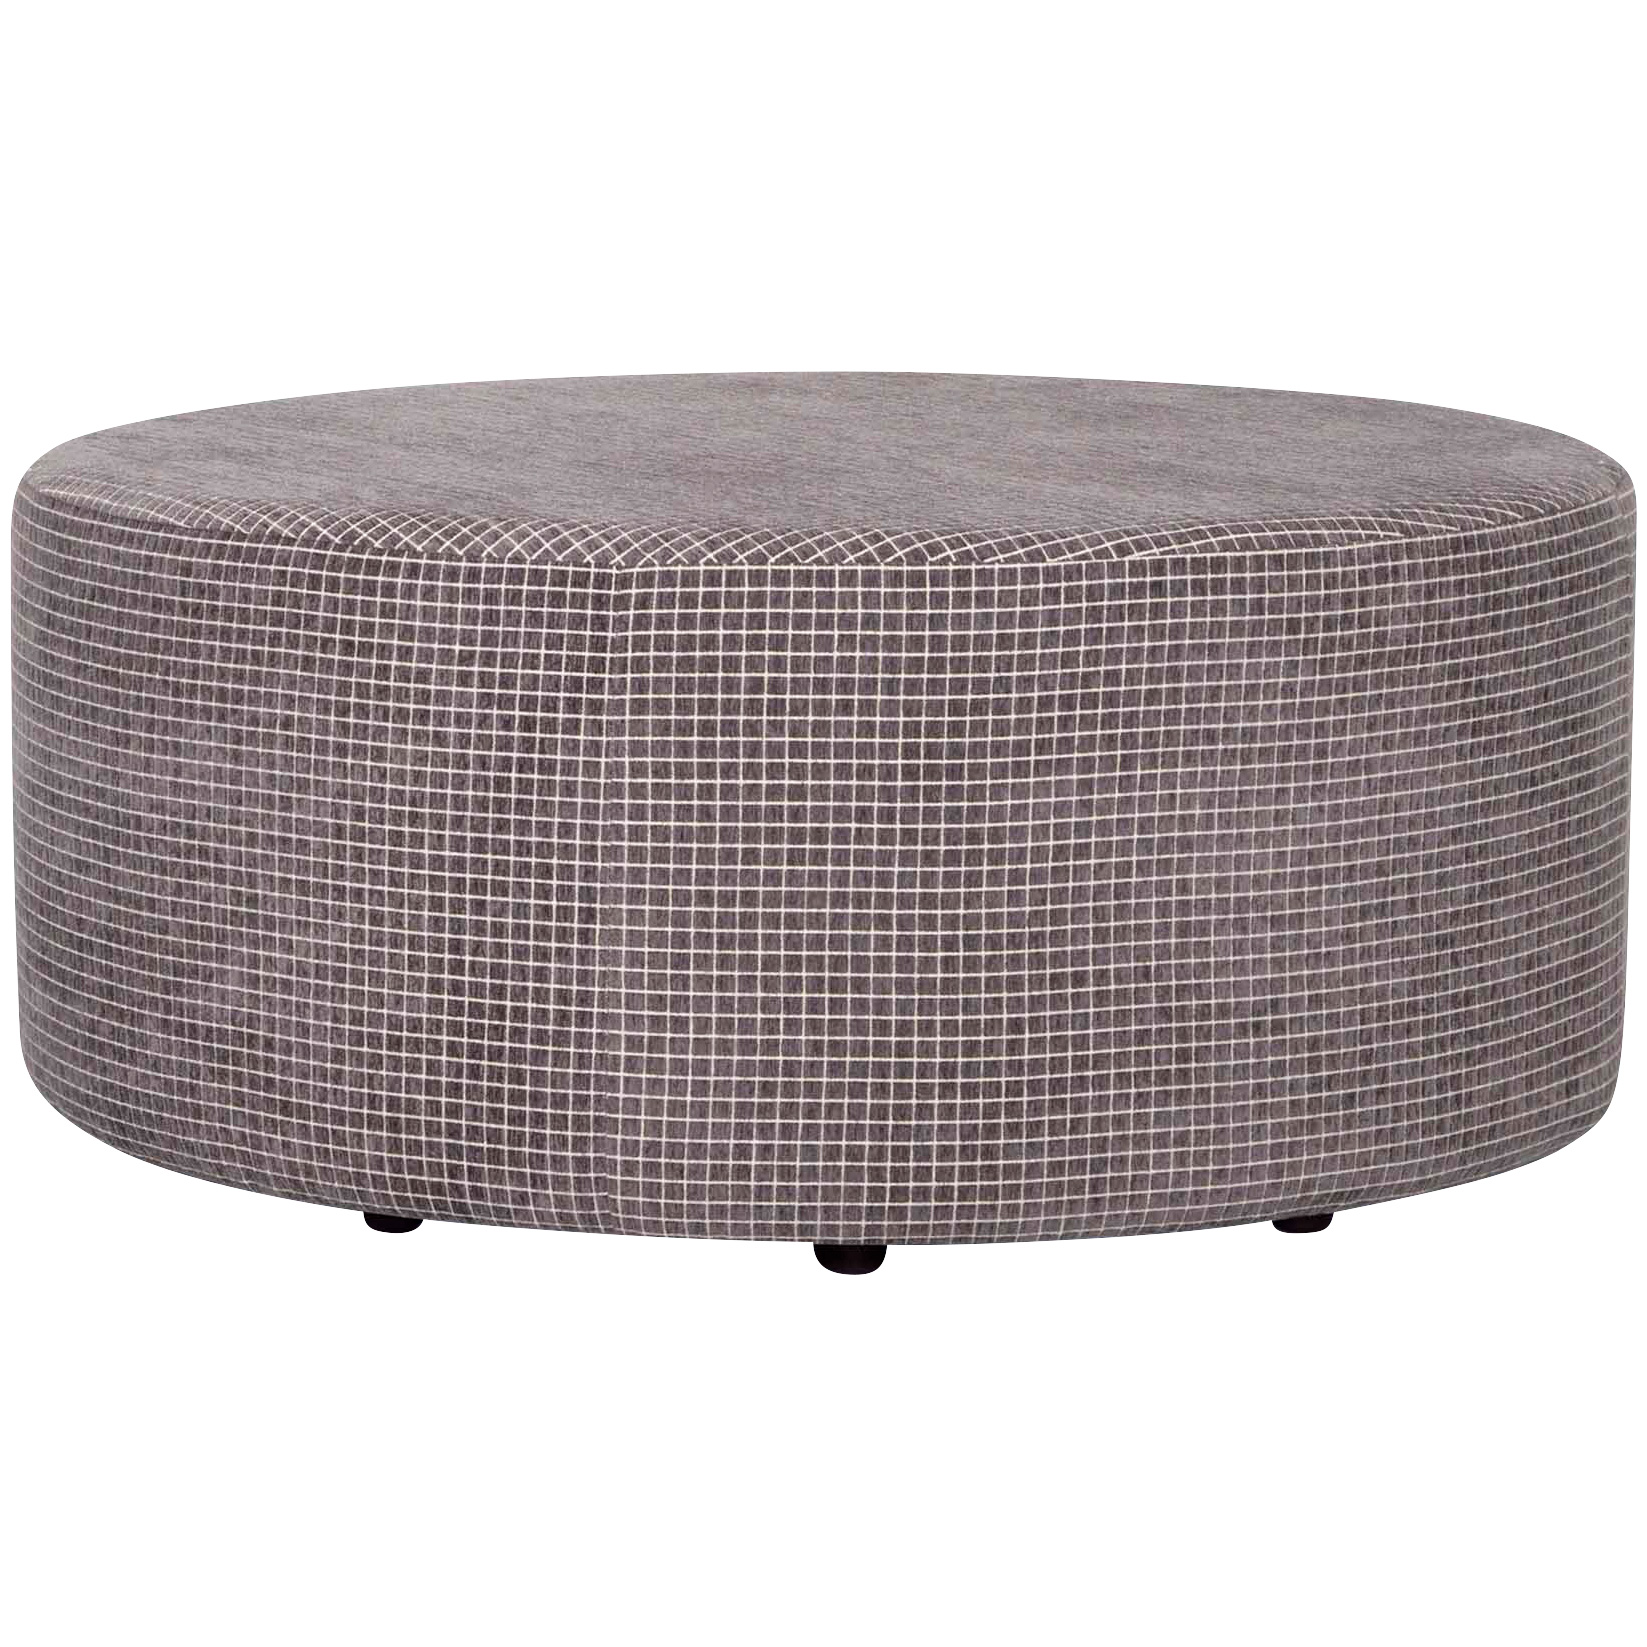 Round Ottoman Coffee Table With Storage - Foter